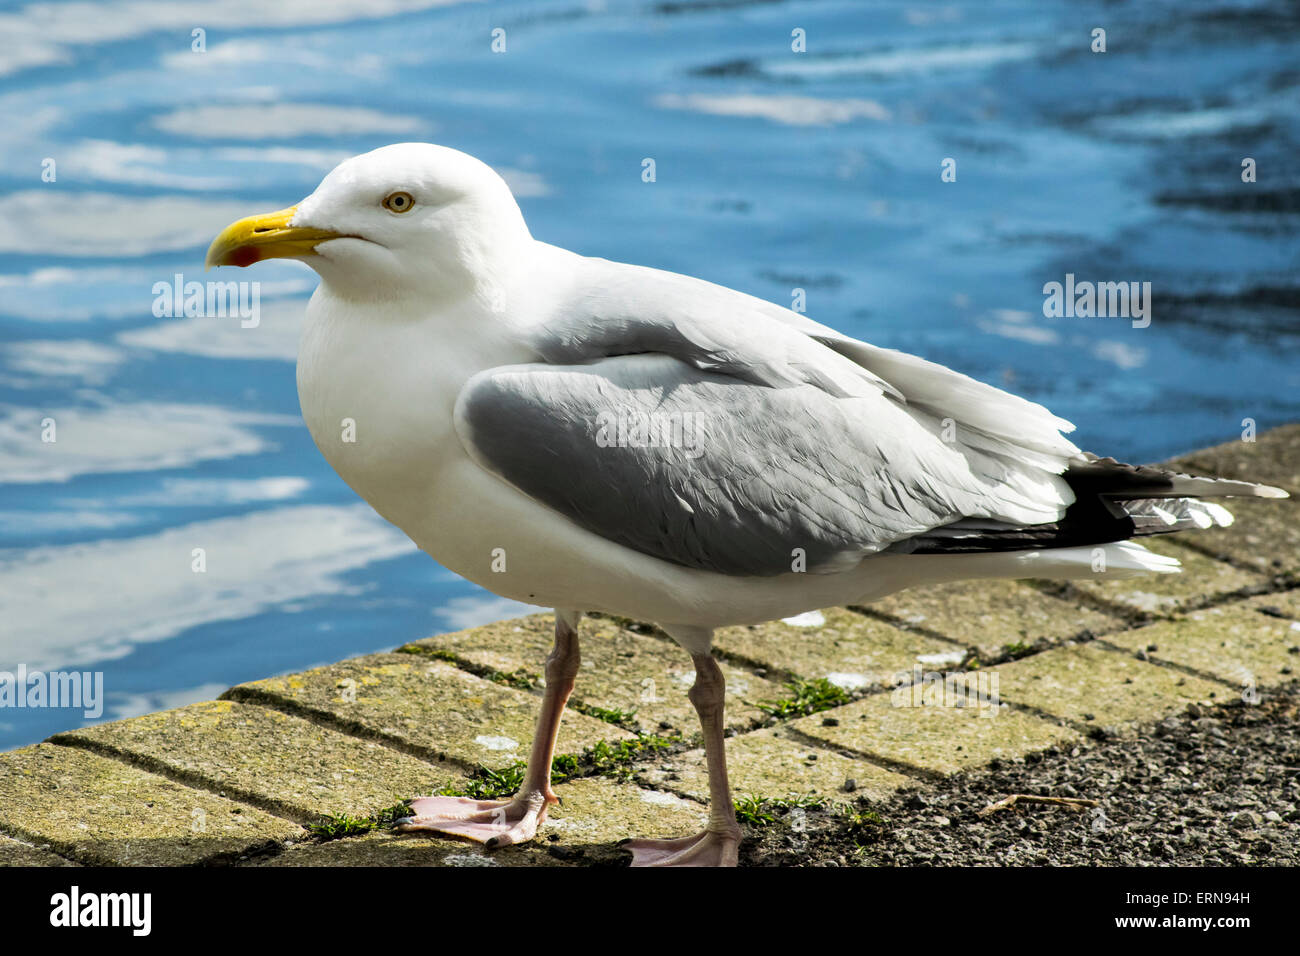 Seagull By A Pond Stock Photo